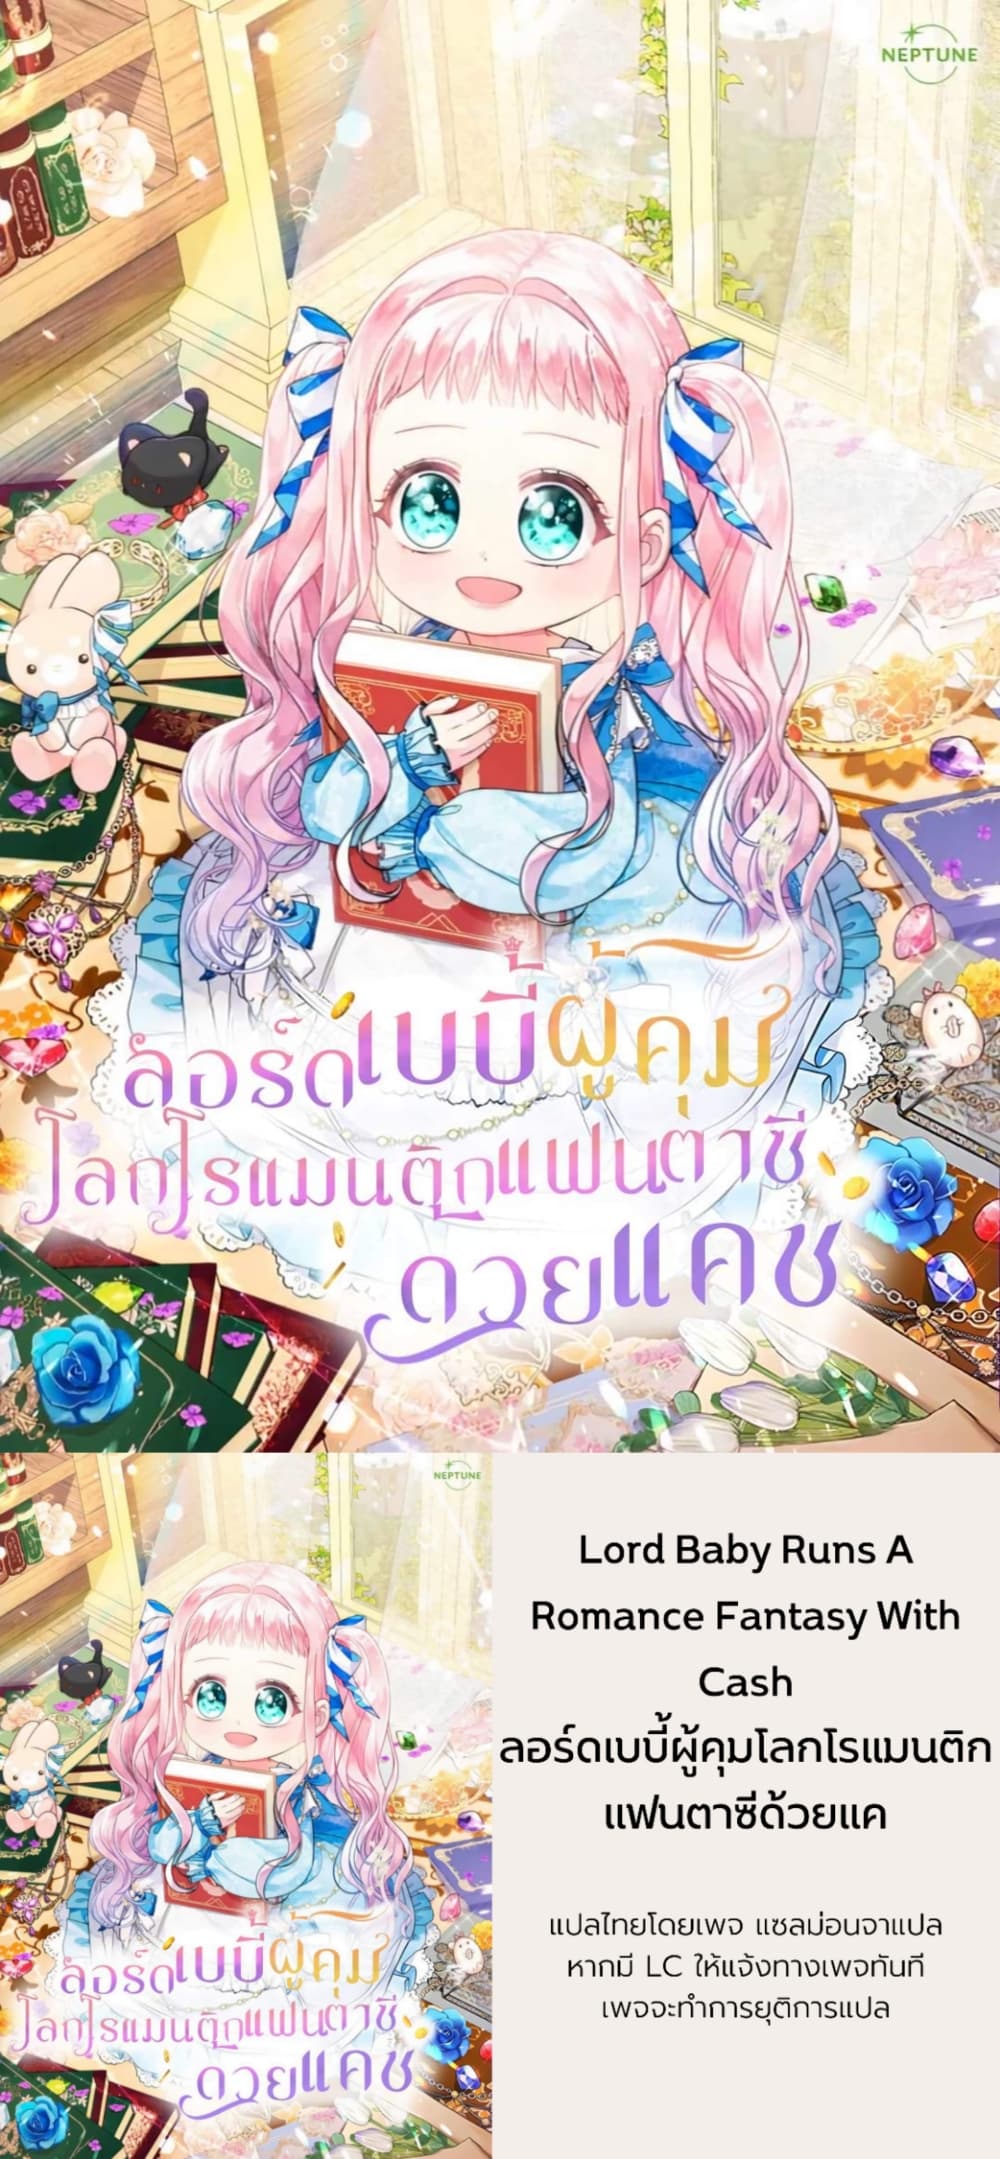 Lord Baby Runs a Romance Fantasy With Cash 15-15